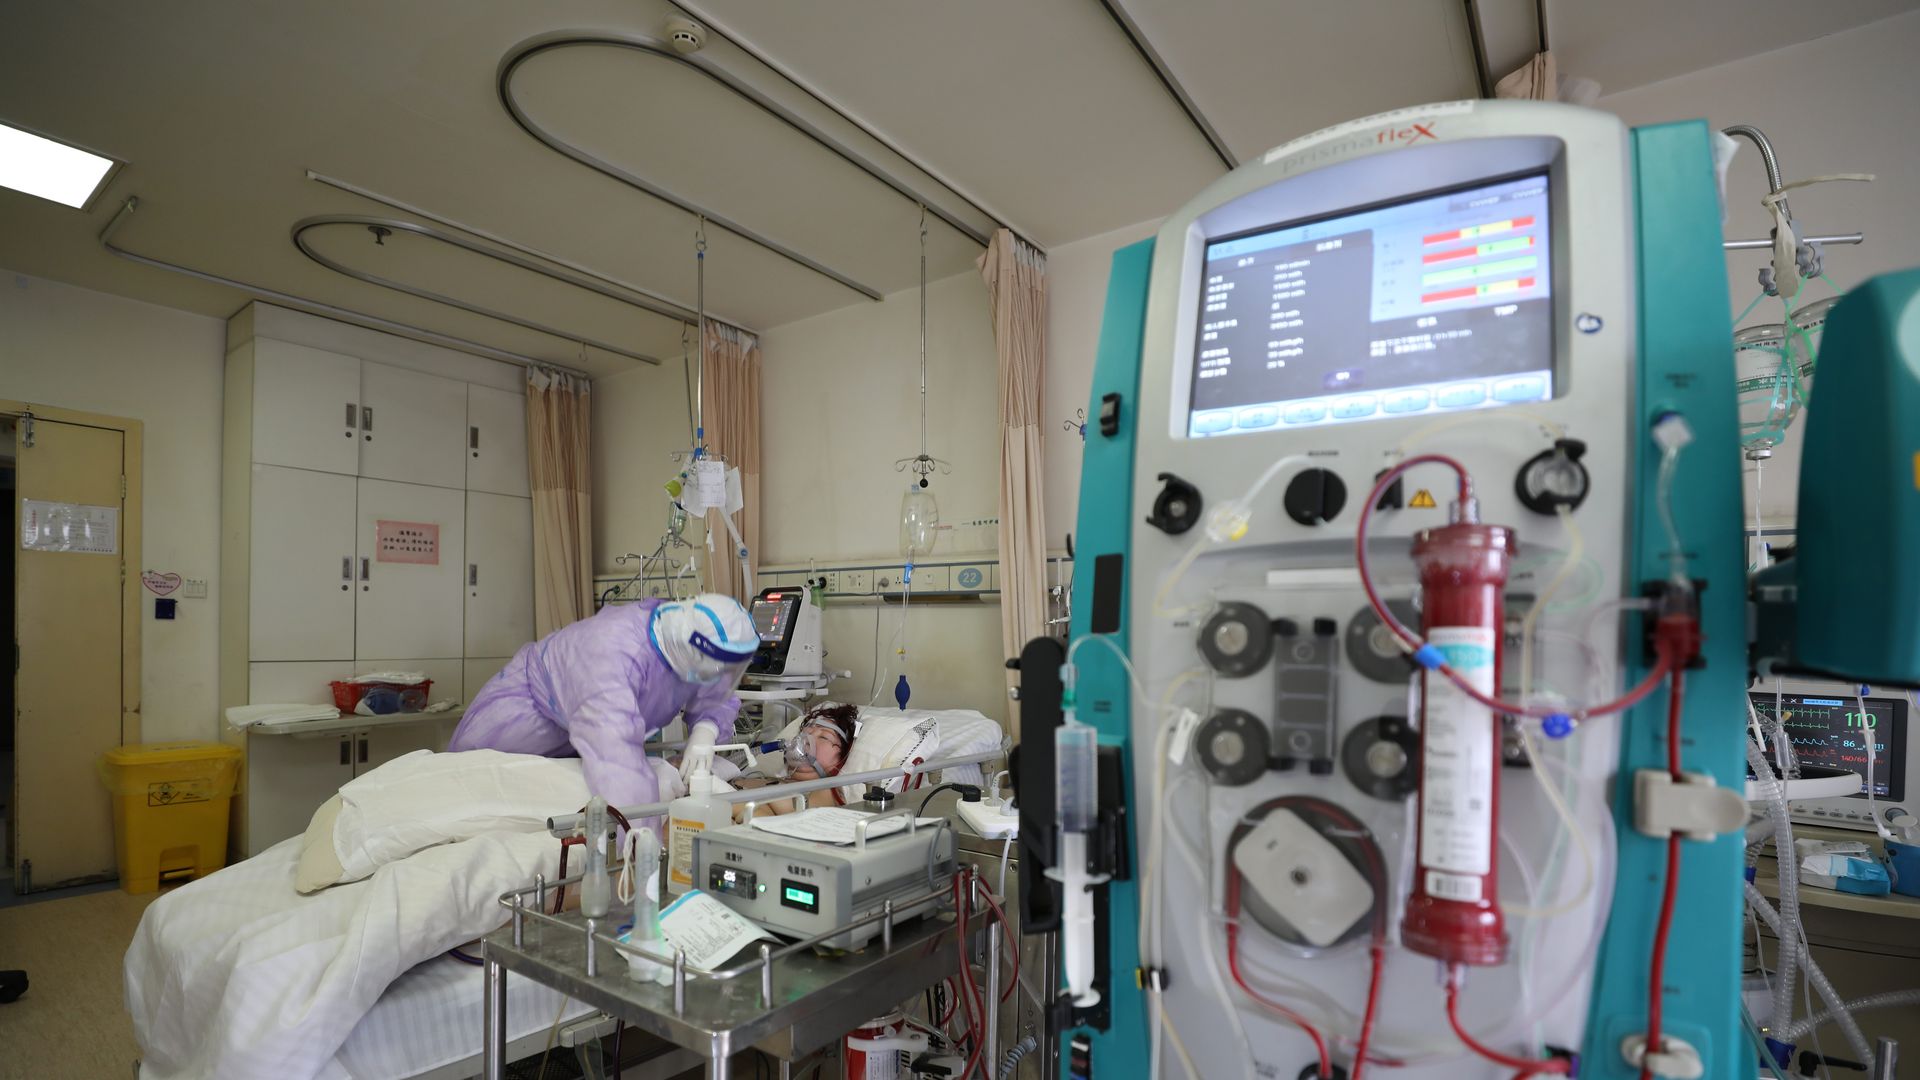 A nurse cares for a patient in a hospital intensive care unit with a blood machine in the foreground.